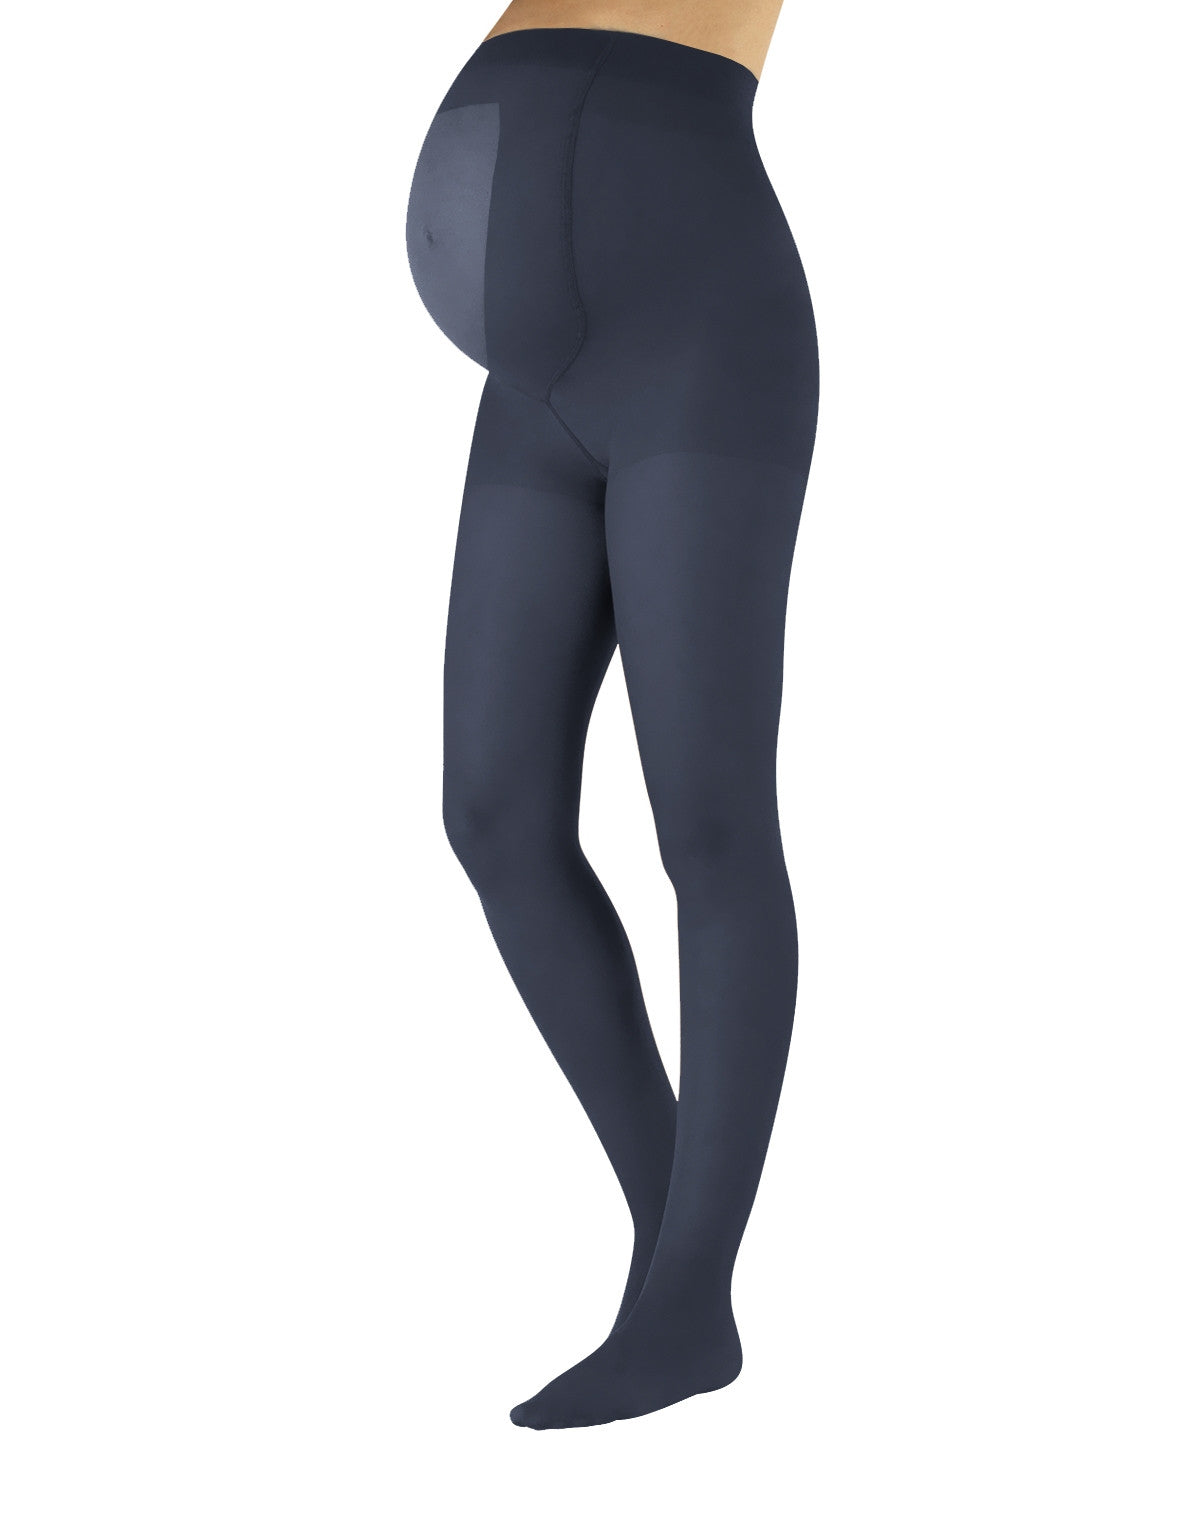 Calzitaly 100 Den Maternity Tights - Denim Blue ultra opaque pregnancy tights with an extra panel and flat seam.